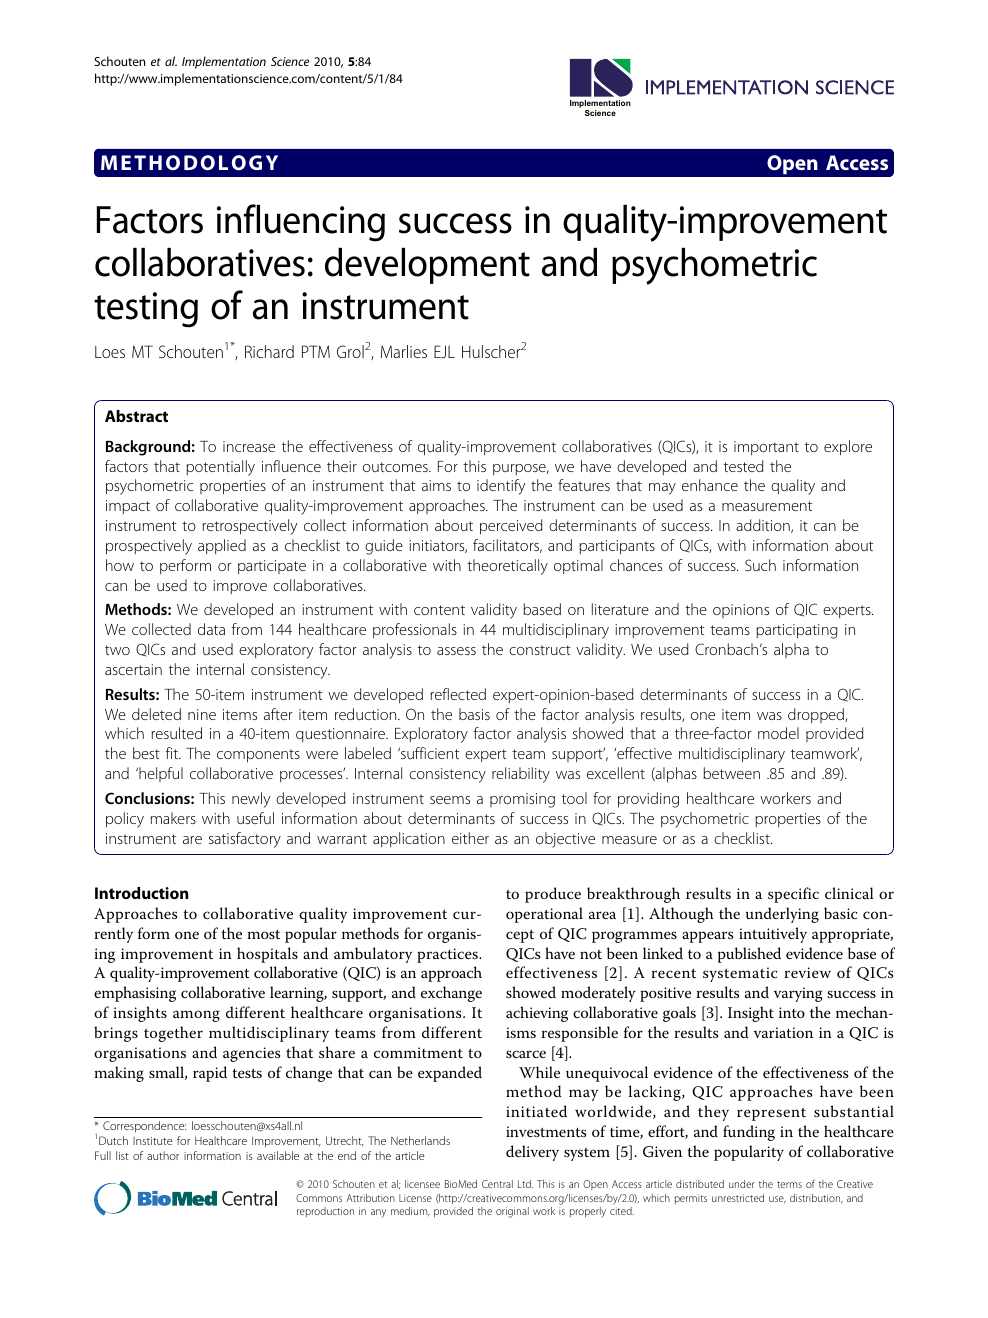 quality improvement research understanding the science of change in healthcare